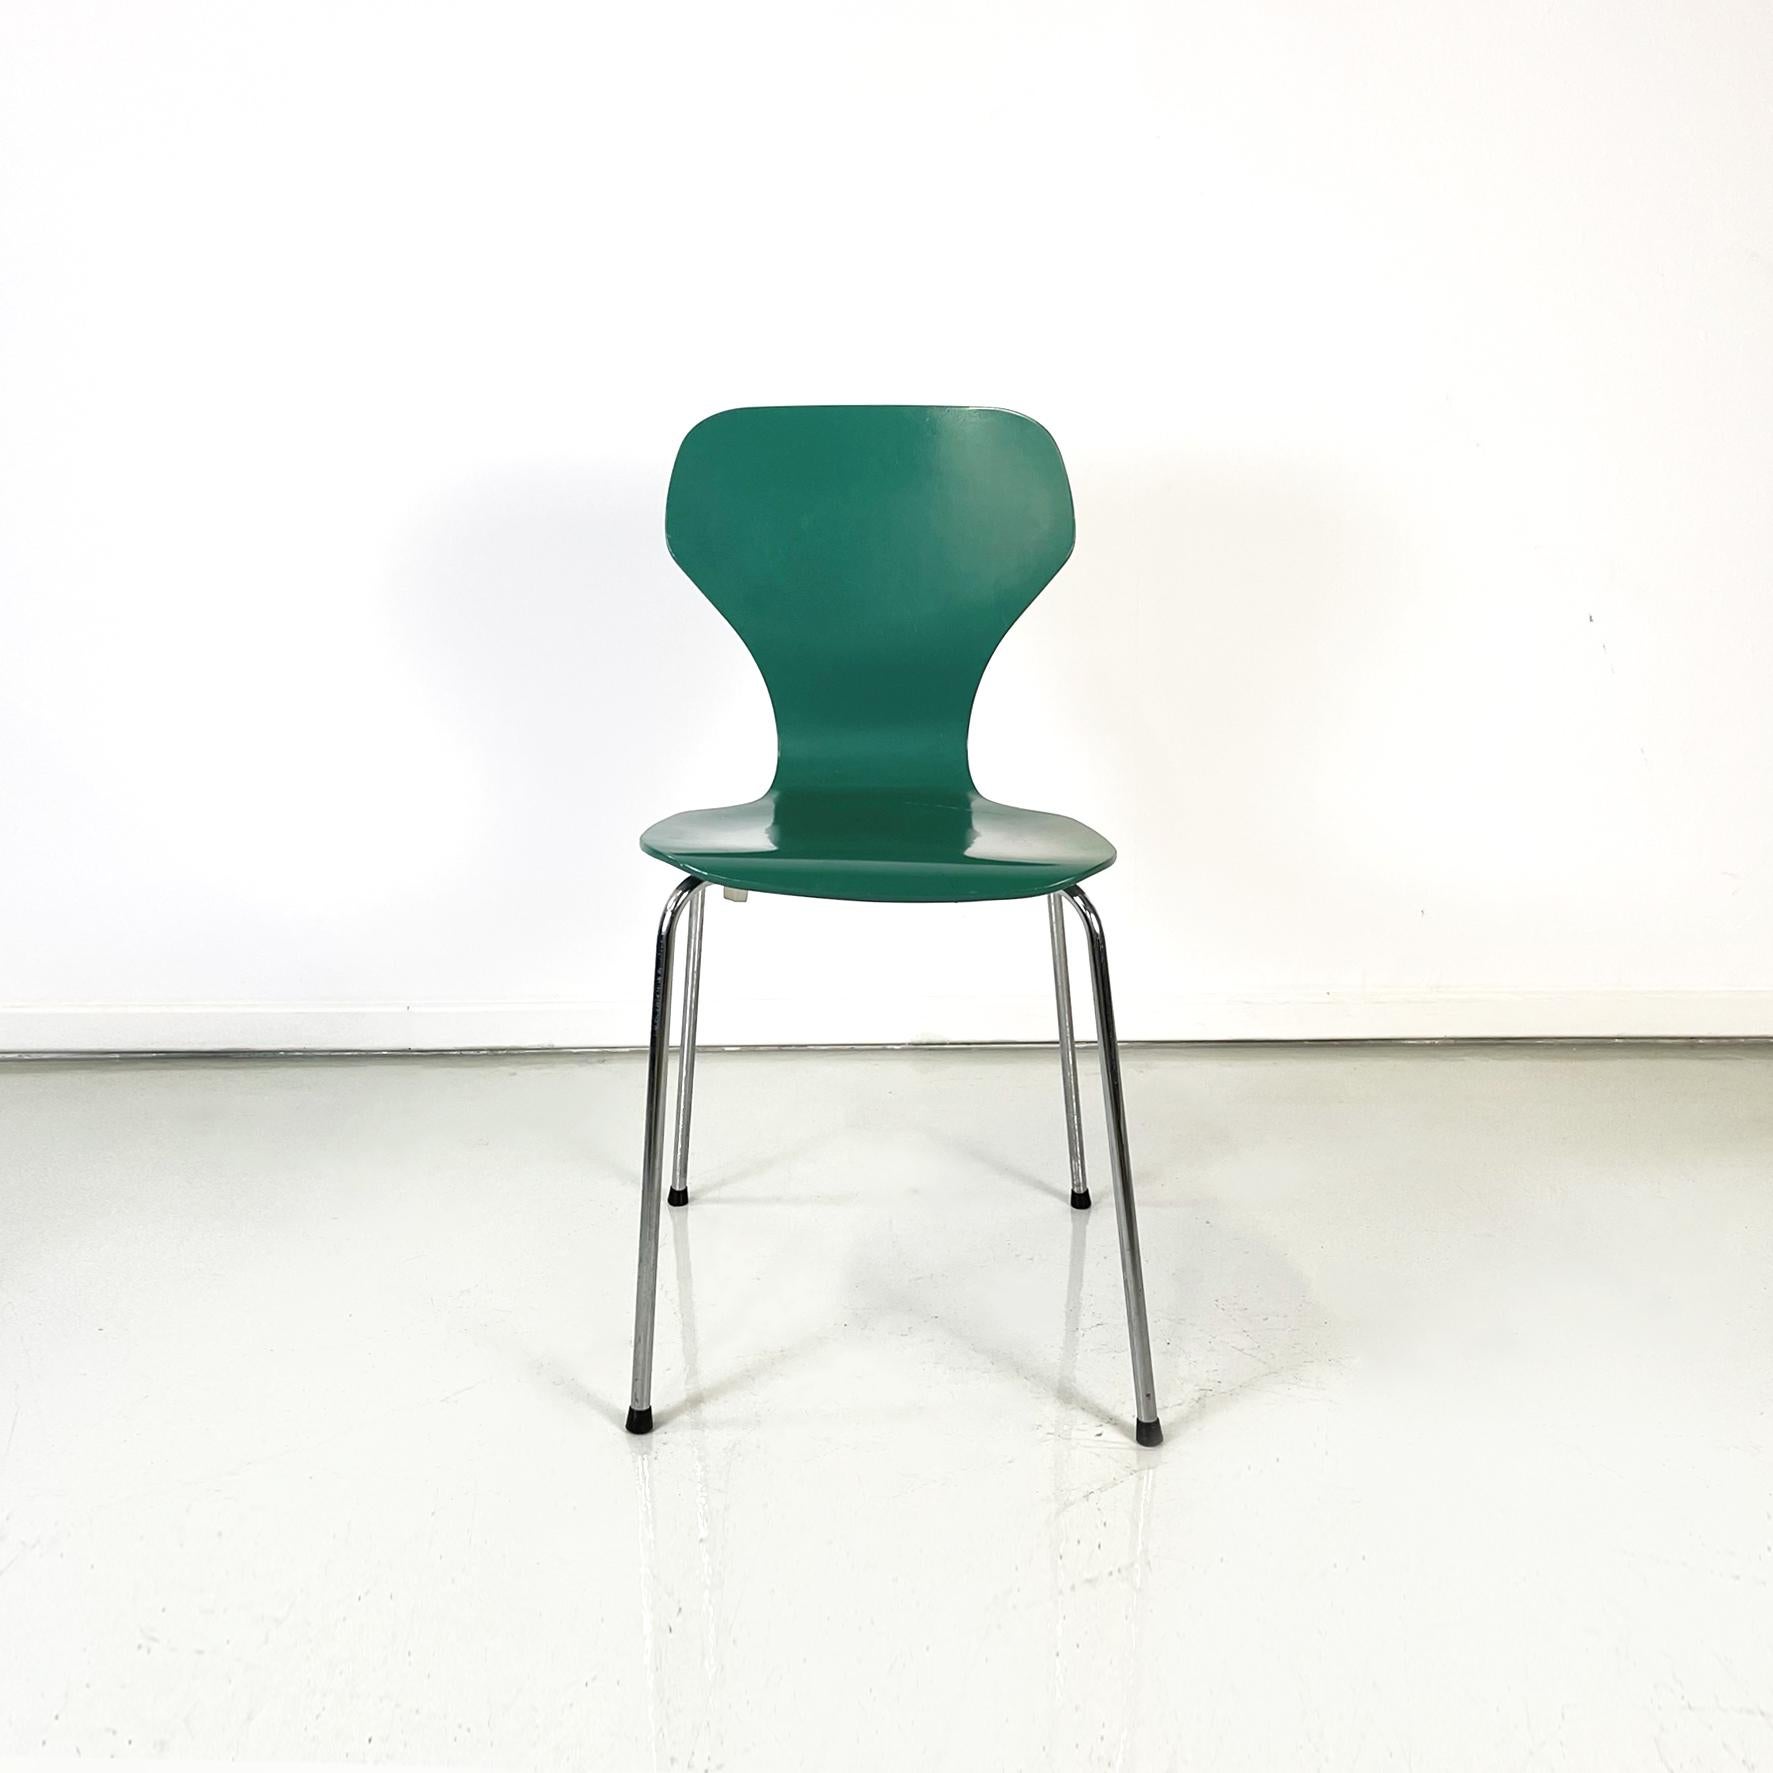 Danish modern green wooden and steel chair by Phoenix, 1970s
Danish dining chair in bent wood, painted in forest green. The legs are in steel with black rubber feet. Stackable.
It is produced by Phoenix in 1970s. Label present under the